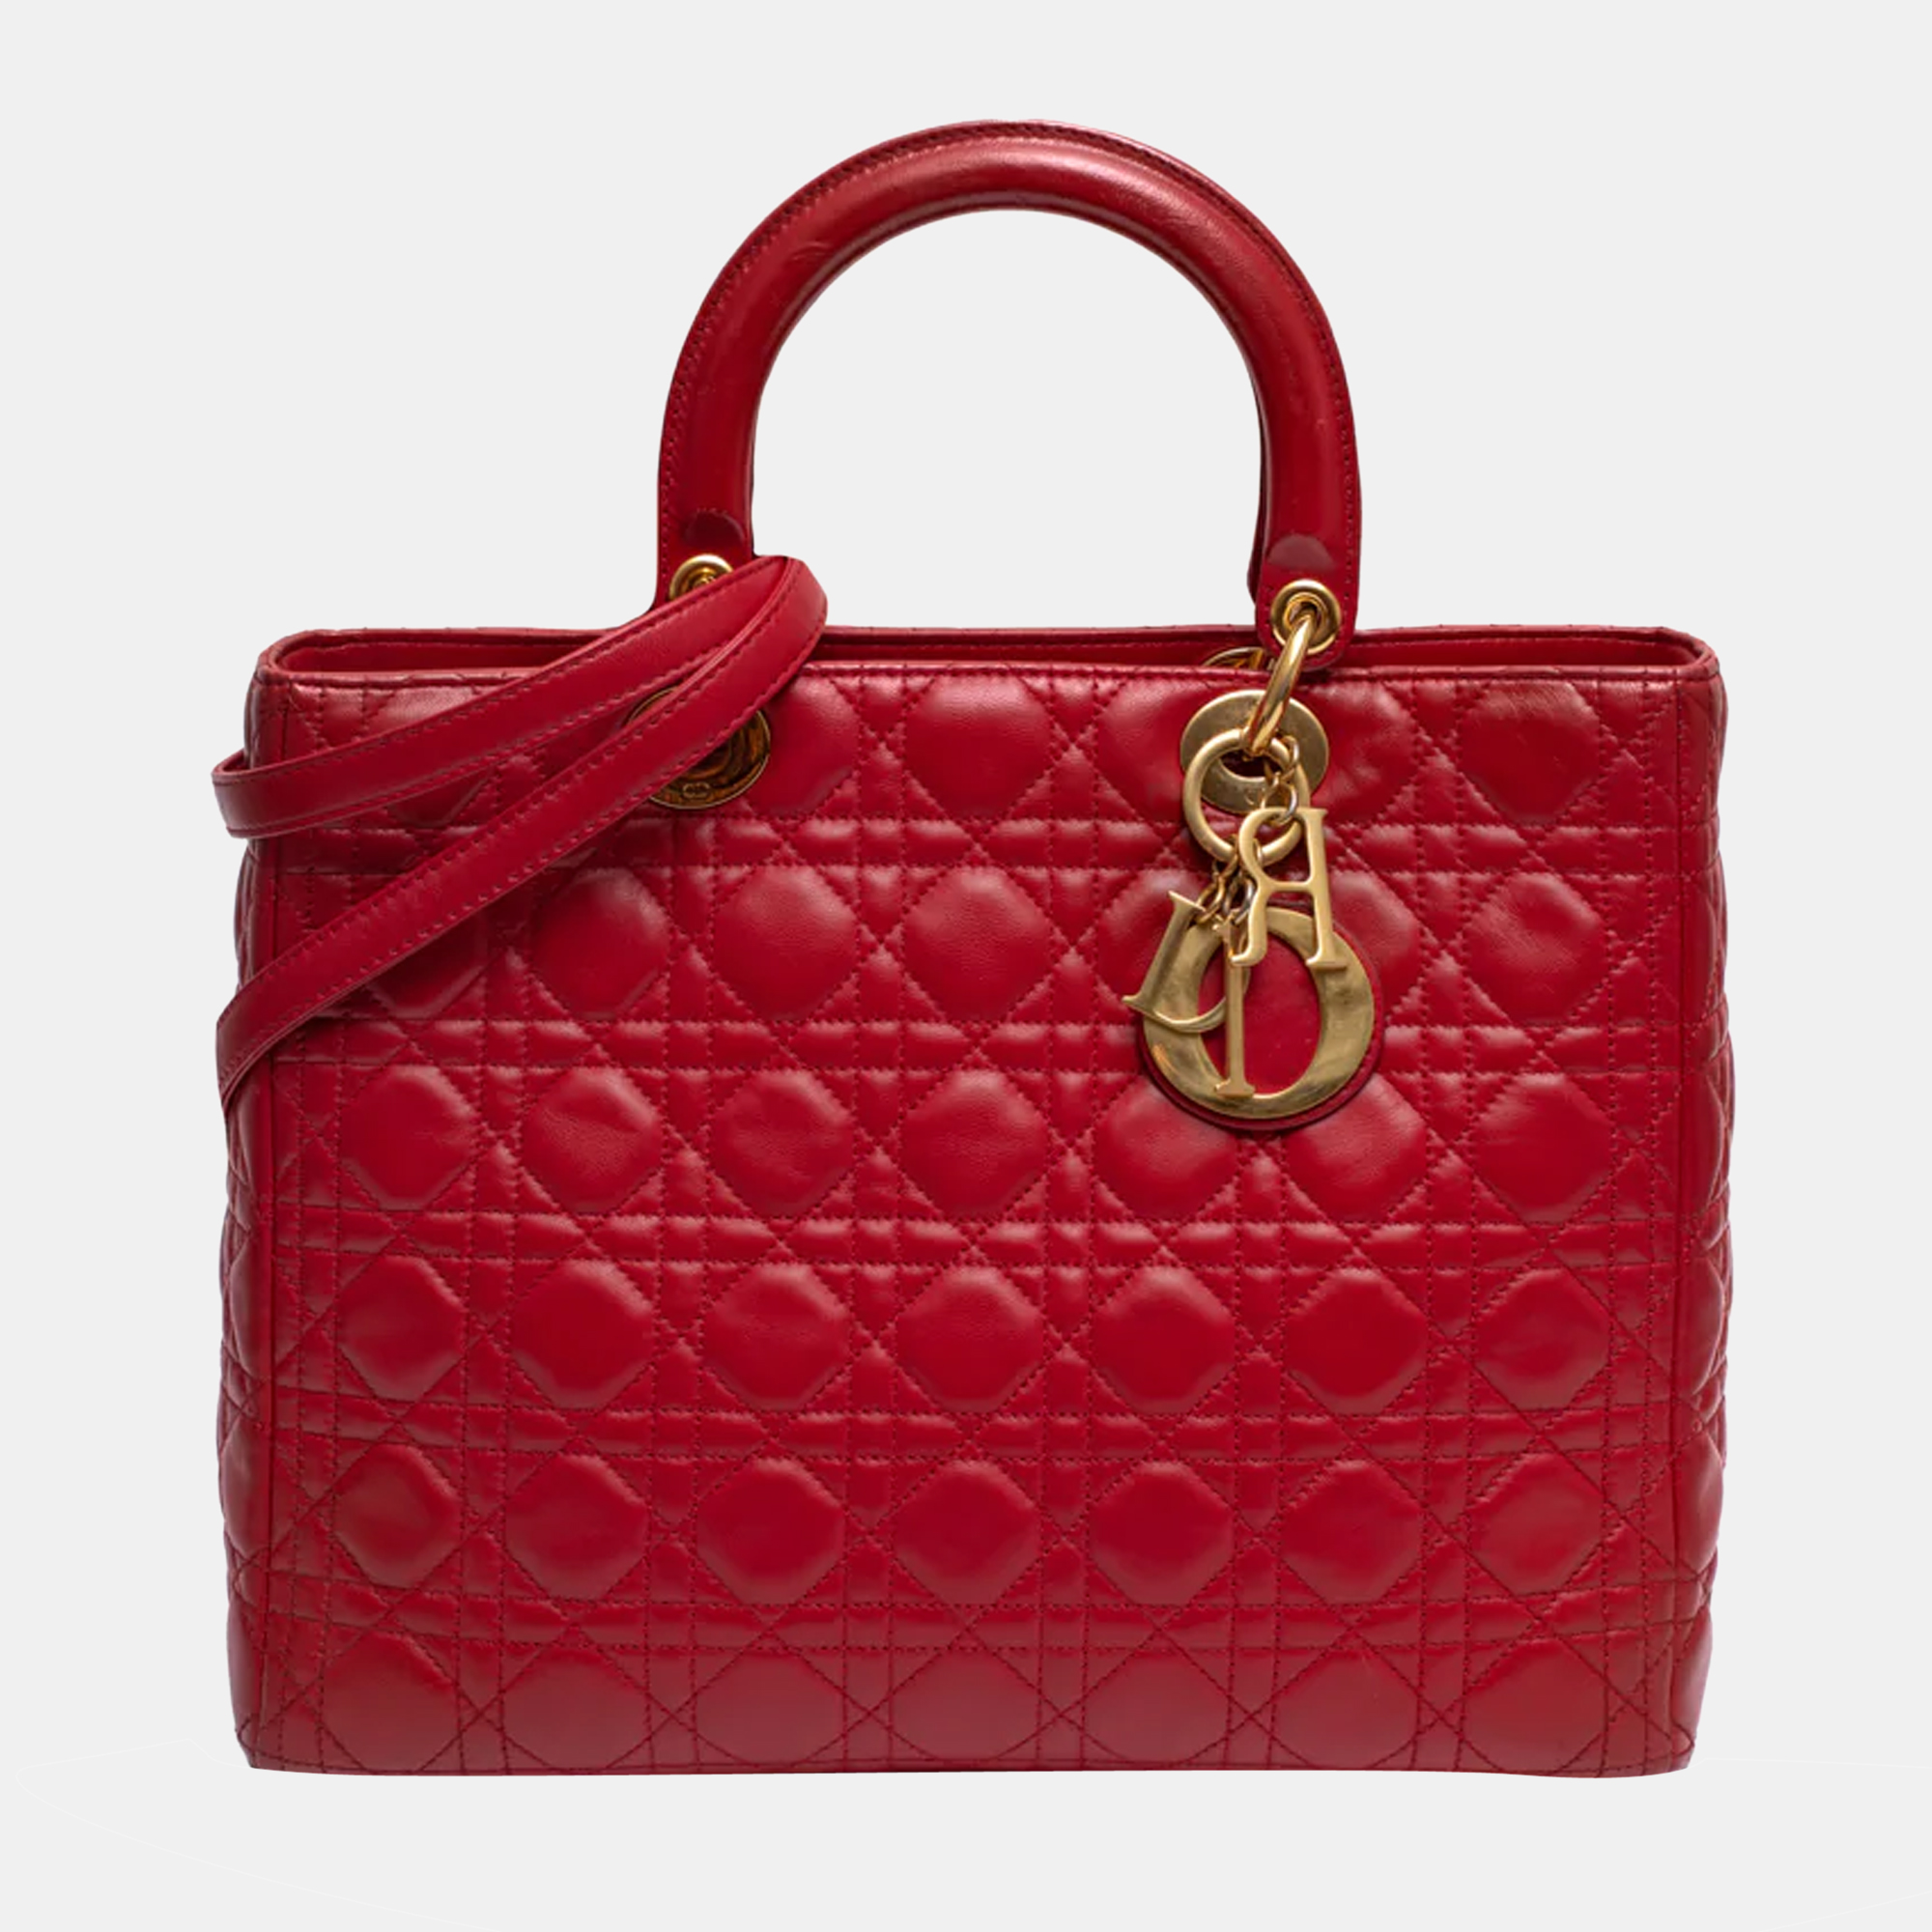 Dior Red Cannage Leather Medium Lady Dior Tote Bag